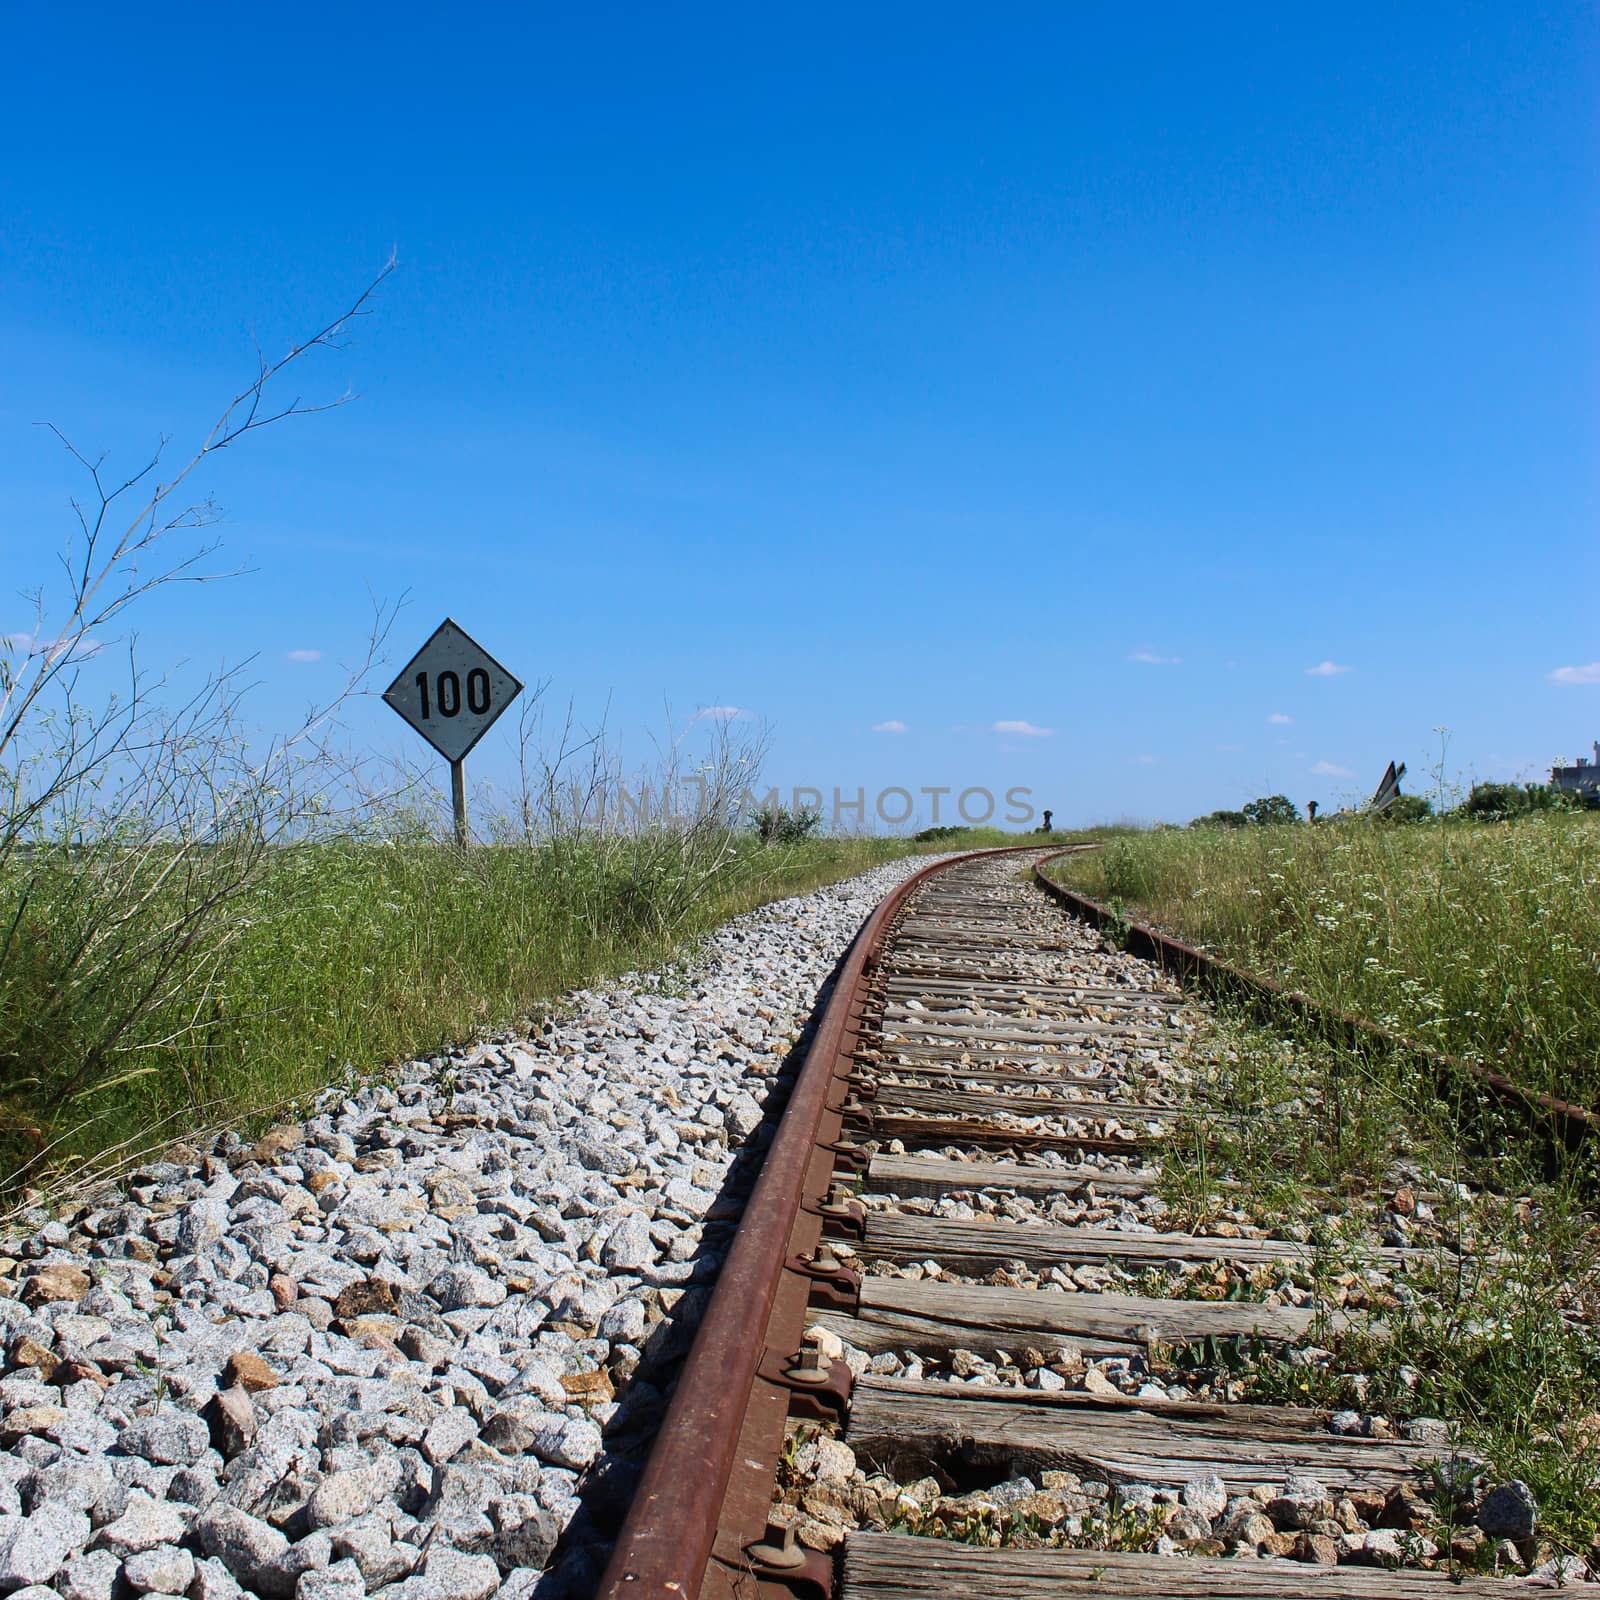 An old railway with a sign on the side that says 100. Railway in Beja, Portugal.